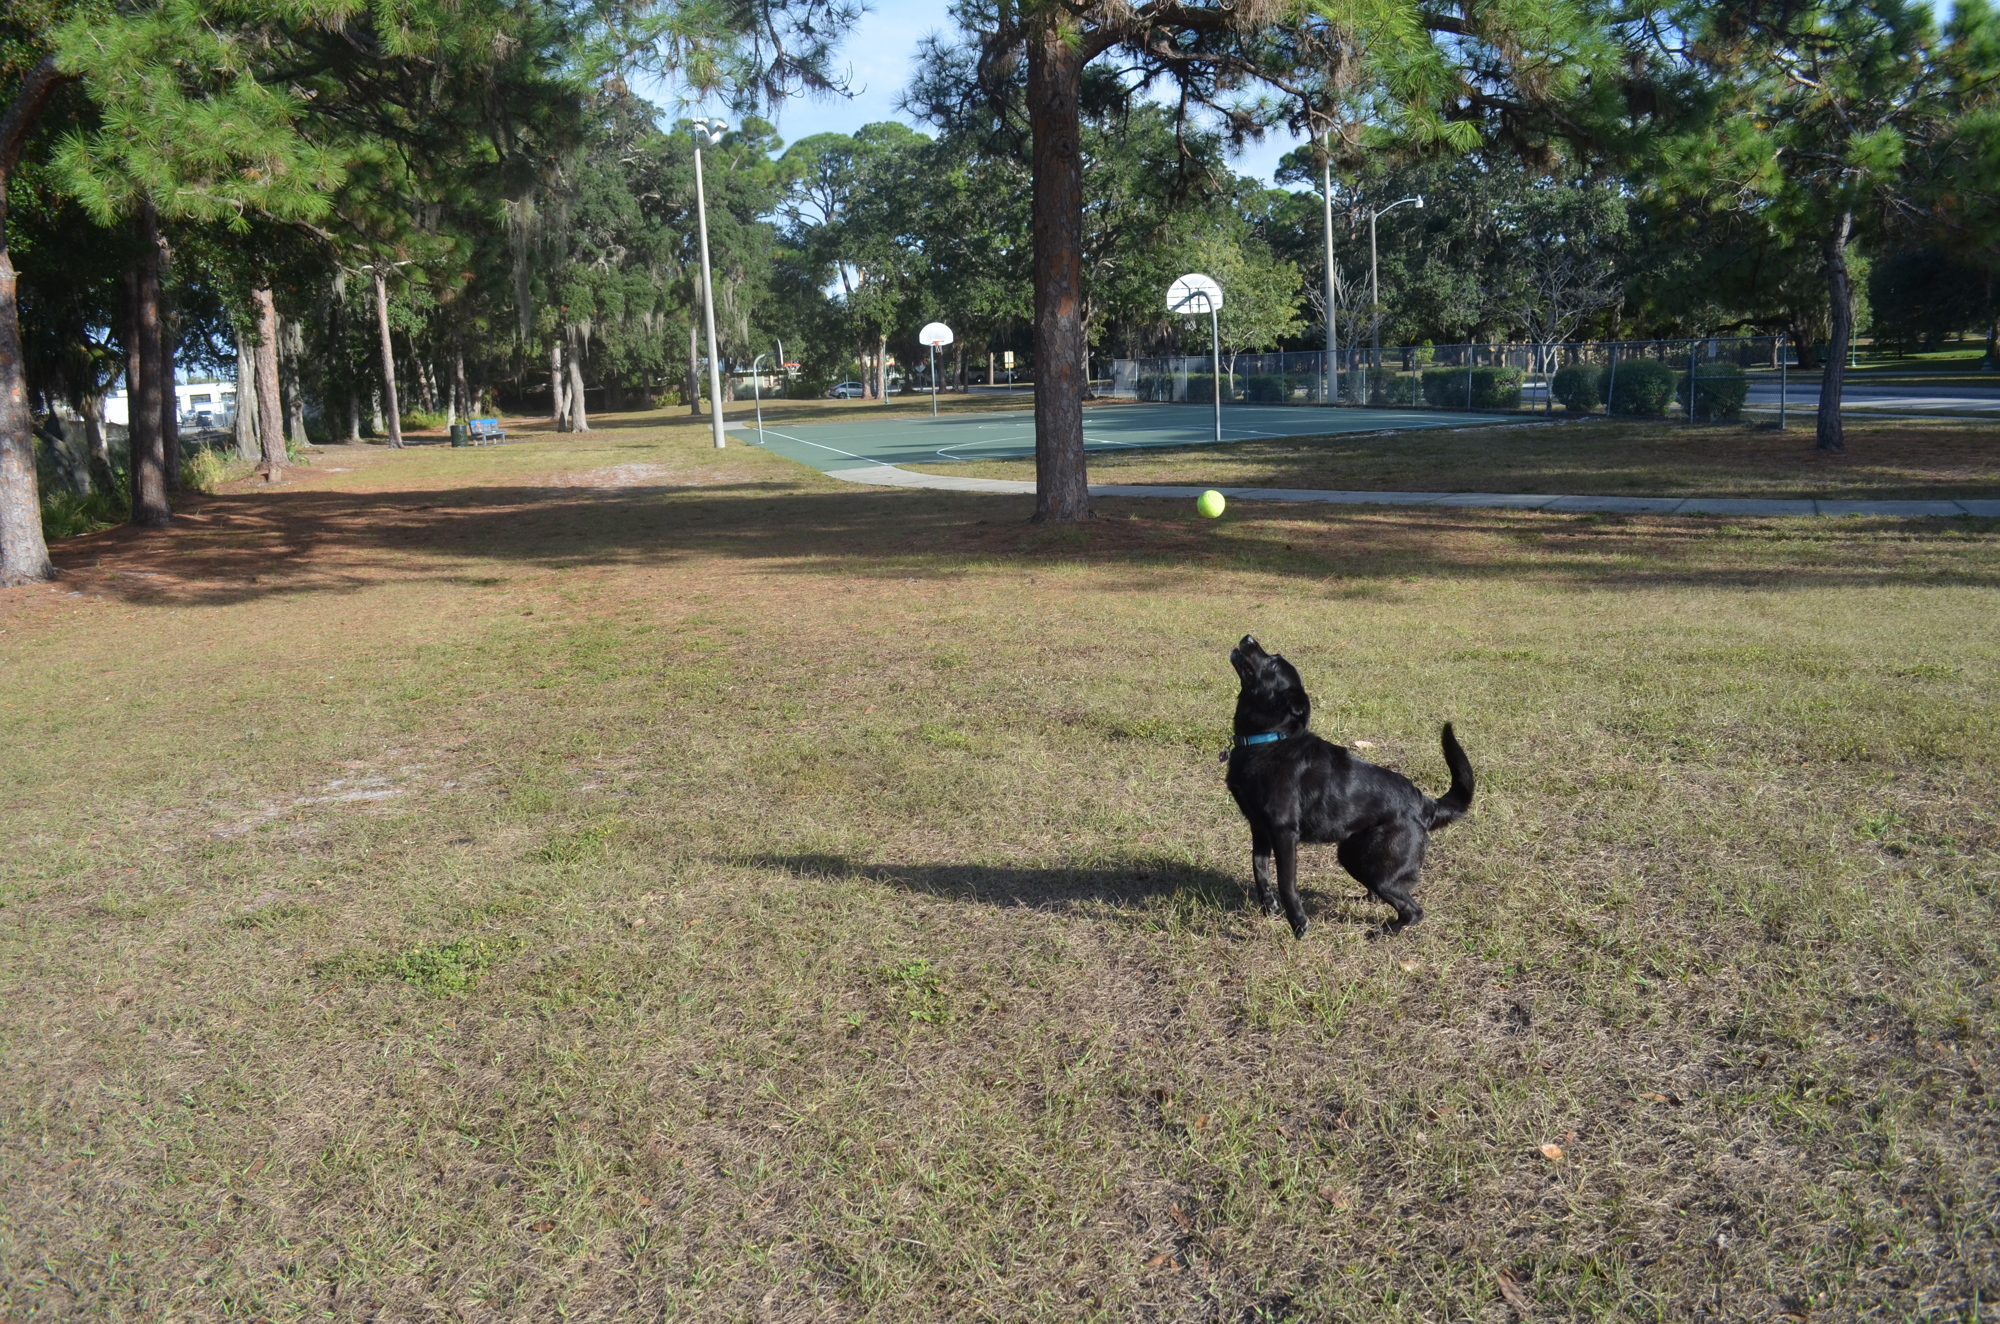 Dale Orlando already uses the grassy areas around the basketball parks at Gillespie Park to play with her dog, Shadow. Now, she's getting it turned into a formal dog park.